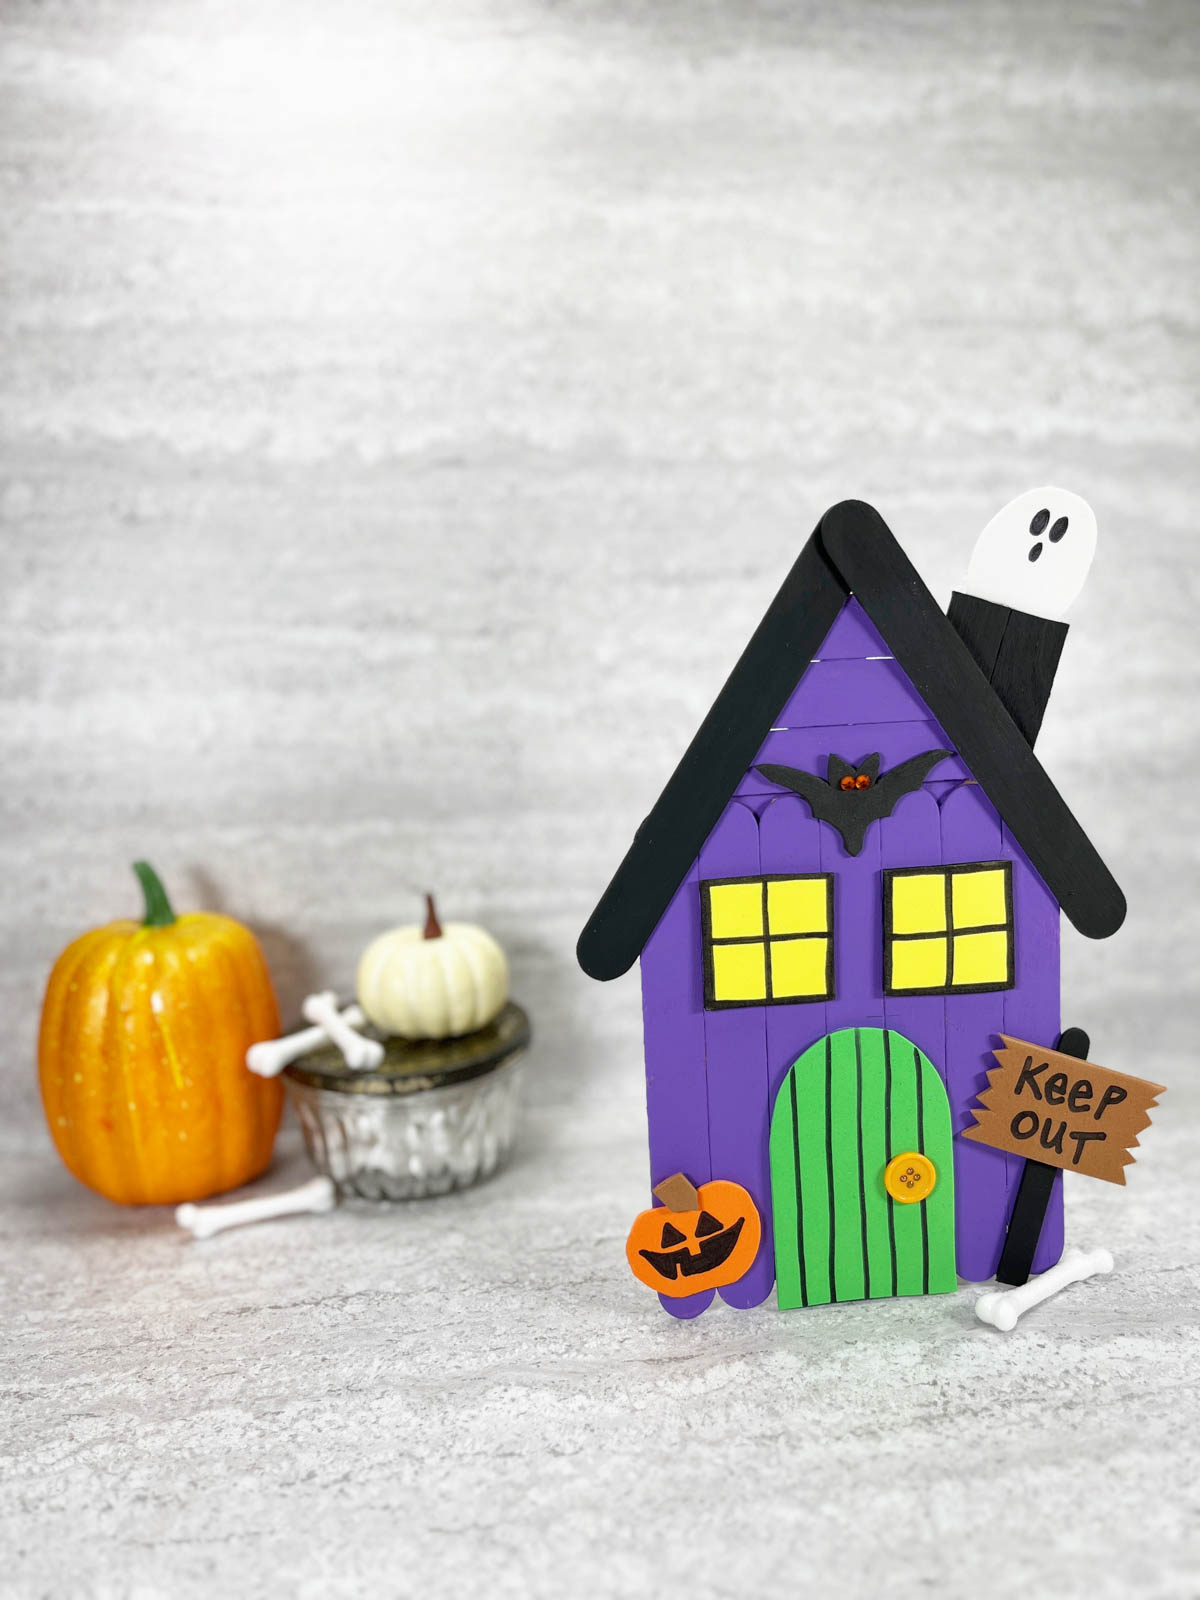 A purple house with a ghost and pumpkins.